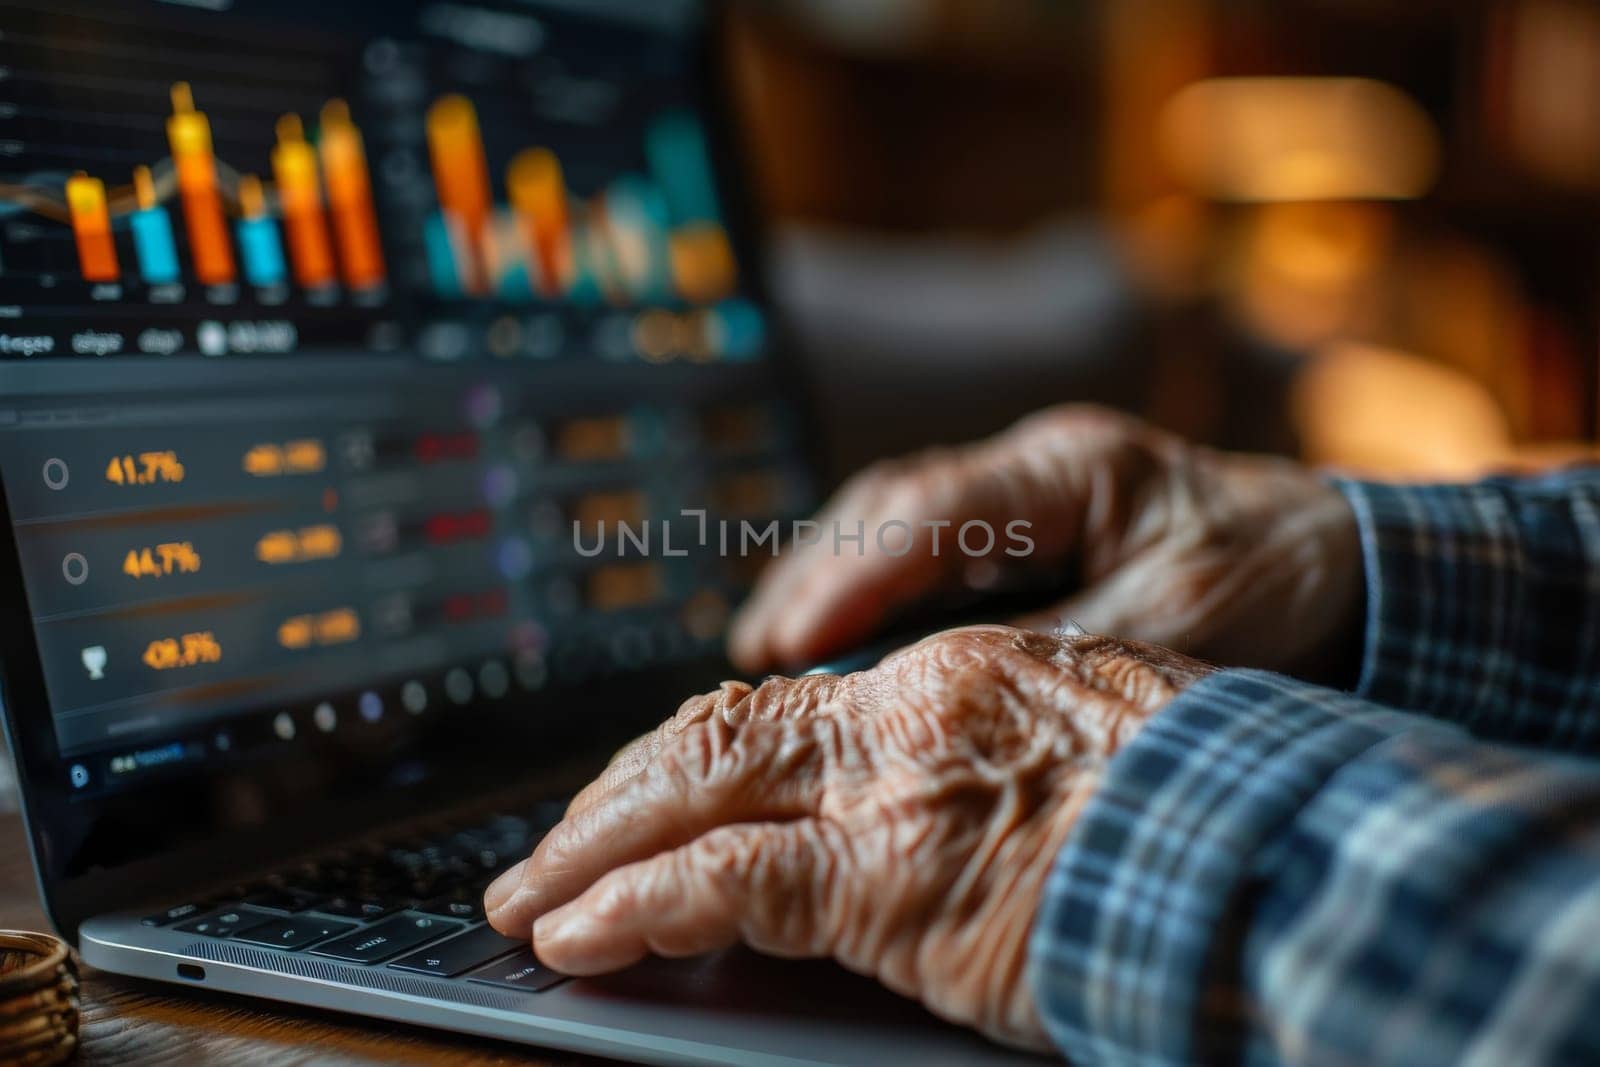 An older man is using a tablet with a finger, and the image has a futuristic, technological feel to it